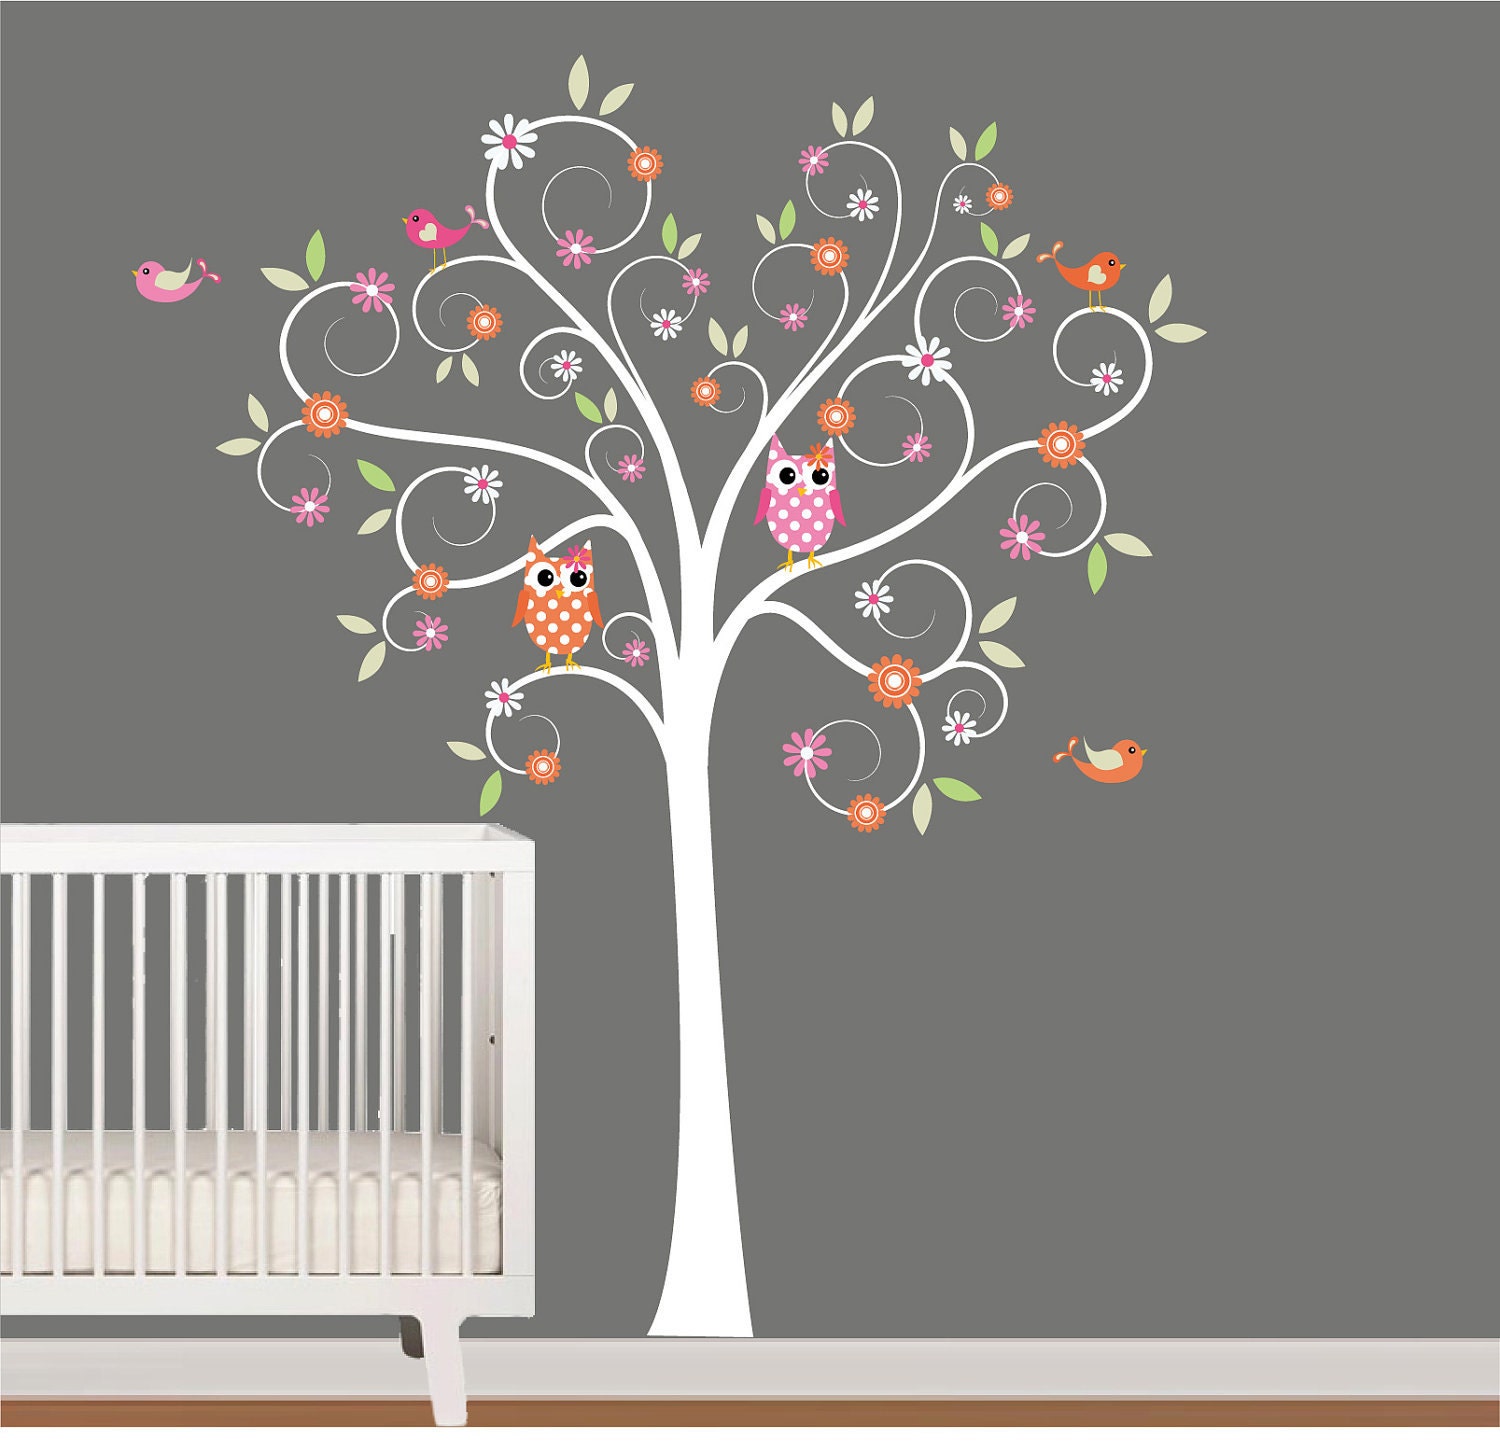 wall decals for nursery flowers : Kids Wall Decals Nursery Tree Decal with  Flowers by NurseryWallArt